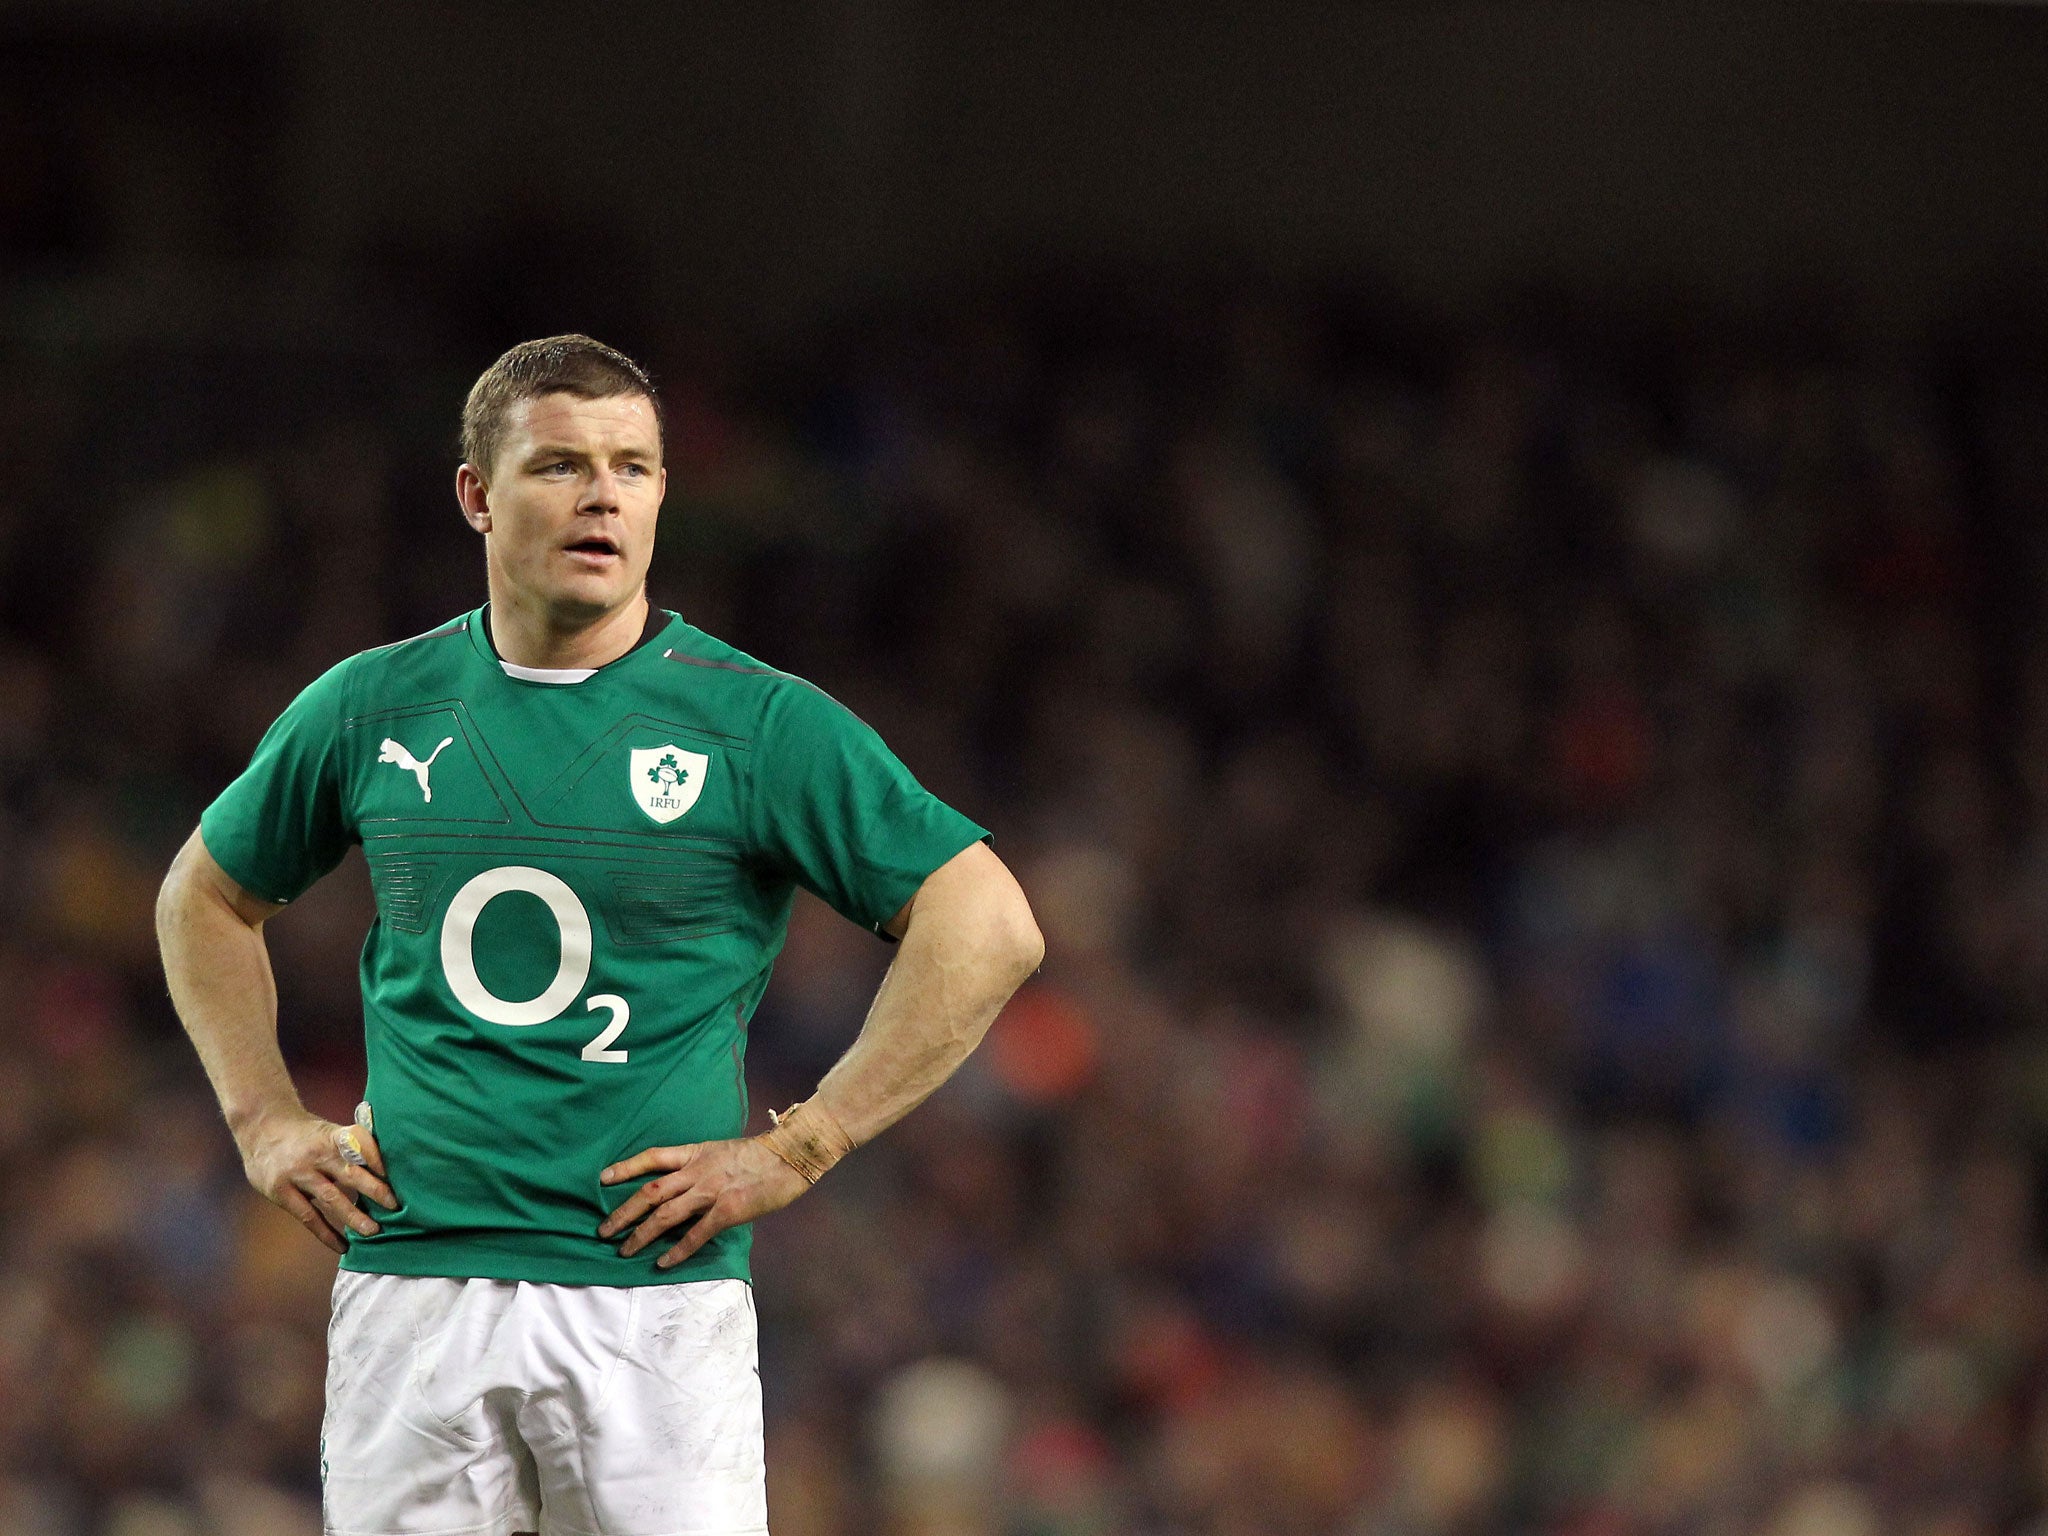 Brian O'Driscoll has another four months to set a new Irish appearances record